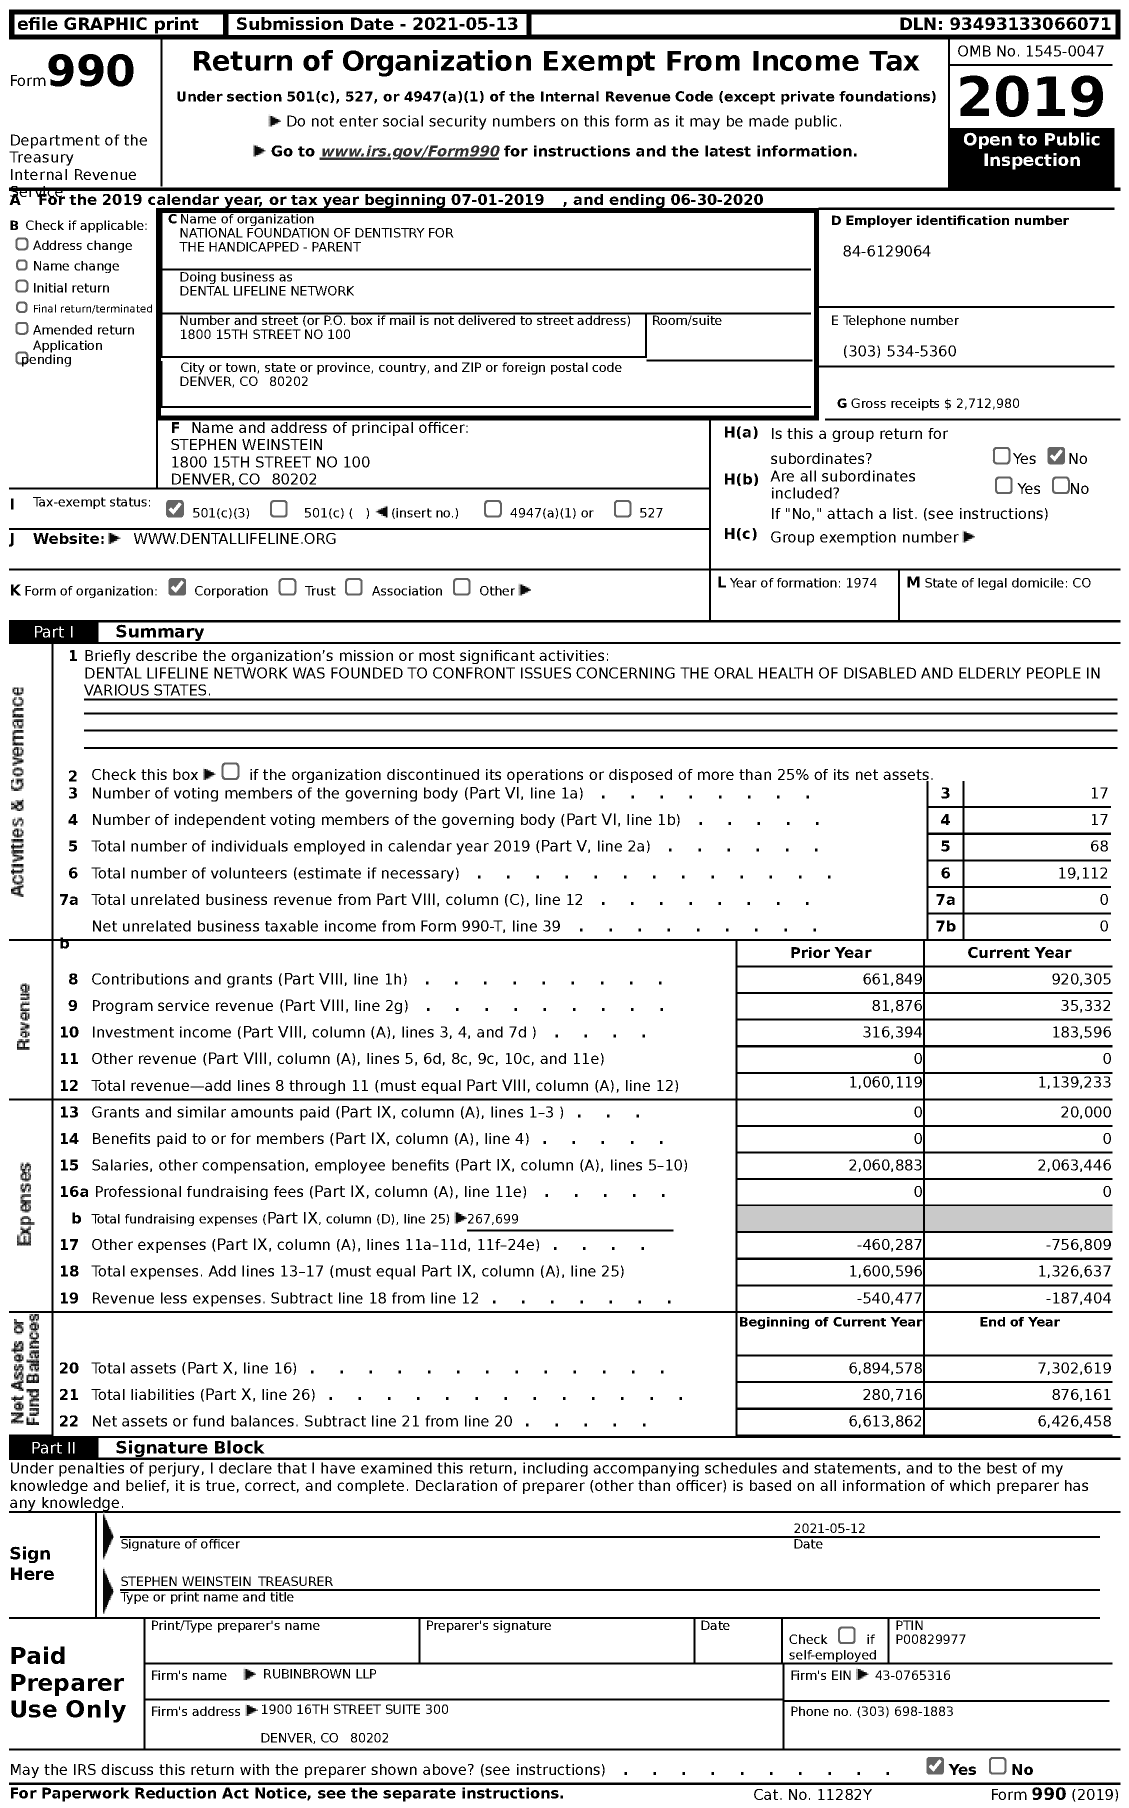 Image of first page of 2019 Form 990 for National Foundation of Dentistry for The Handicapped / Dental Lifeline Network (DLN)